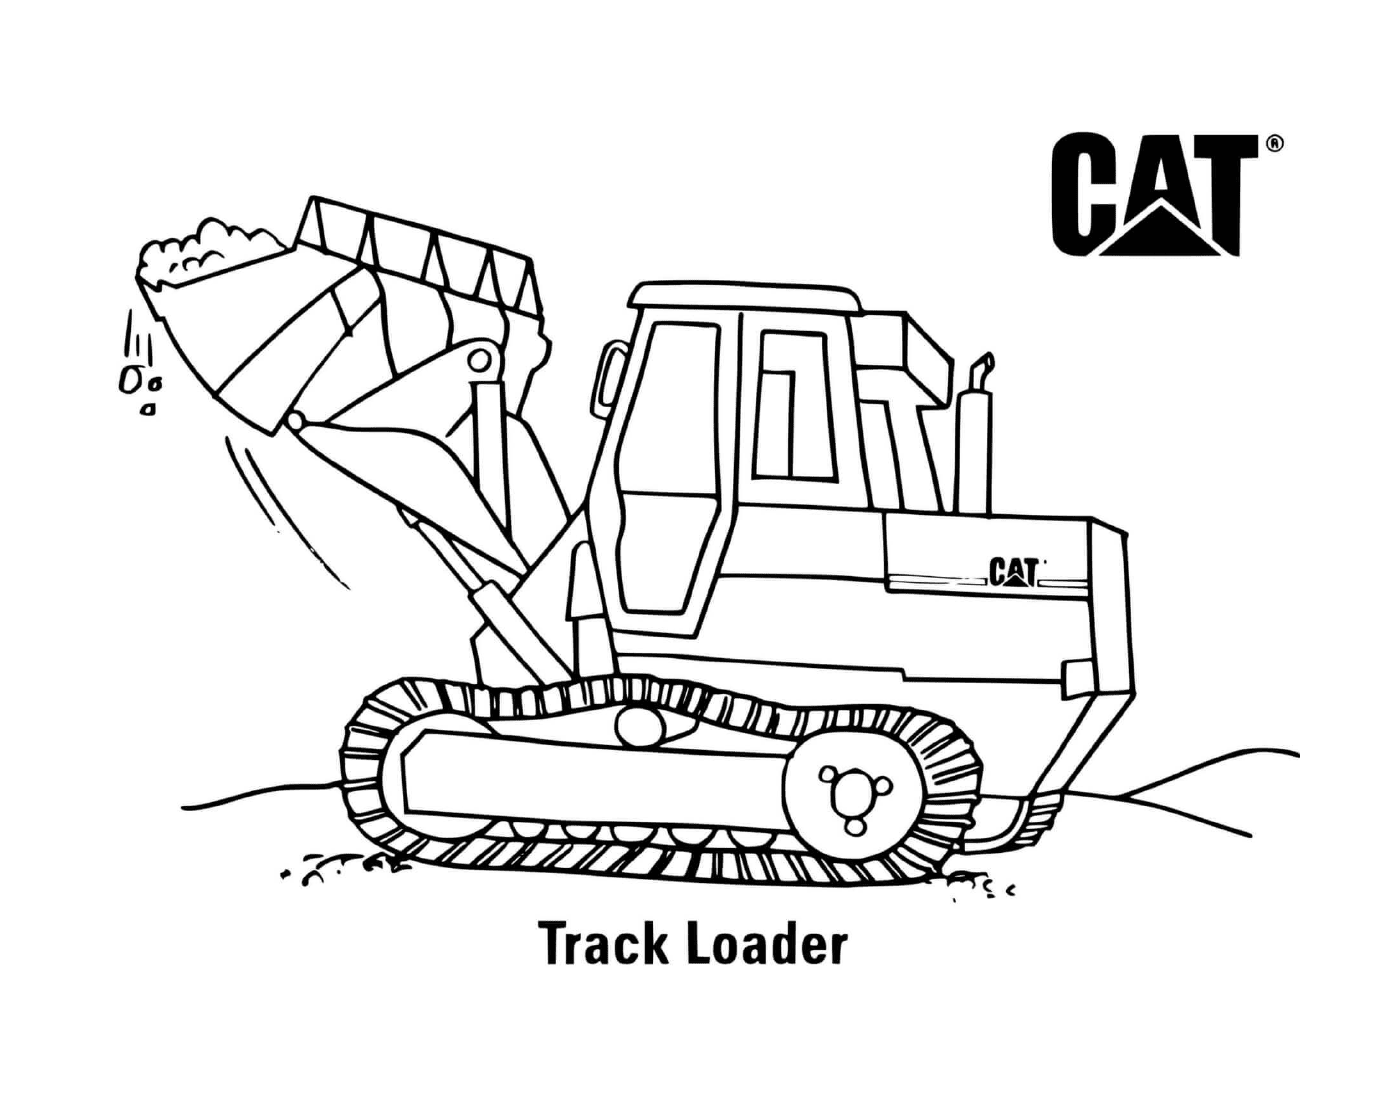  Track loader used on a construction site 